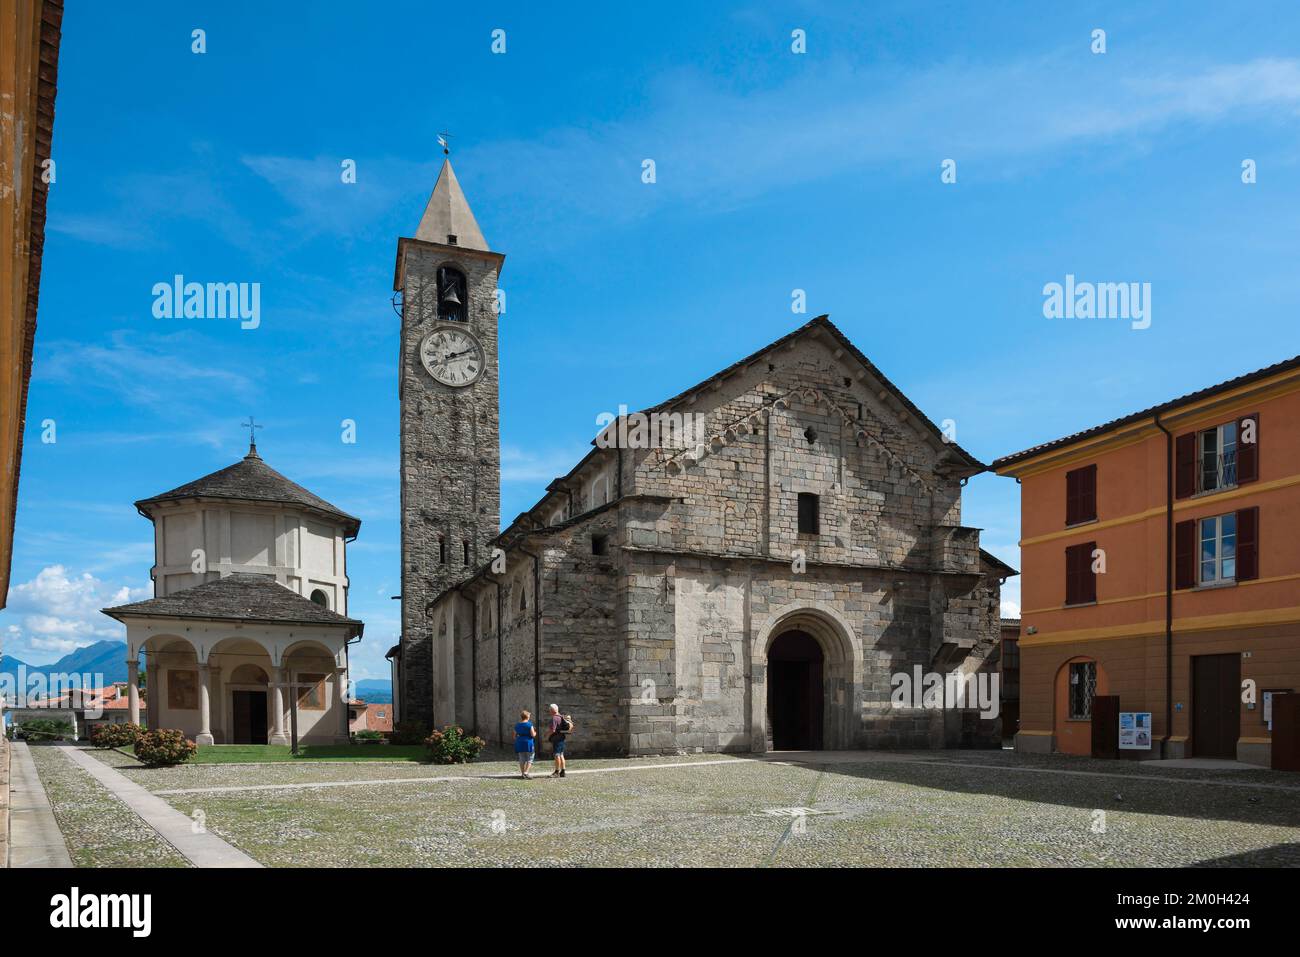 Baveno Italy town, view in summer of the scenic 12th century church and octagonal baptistry in the Piazza della Chiesa in Baveno, Piedmont, Italy Stock Photo